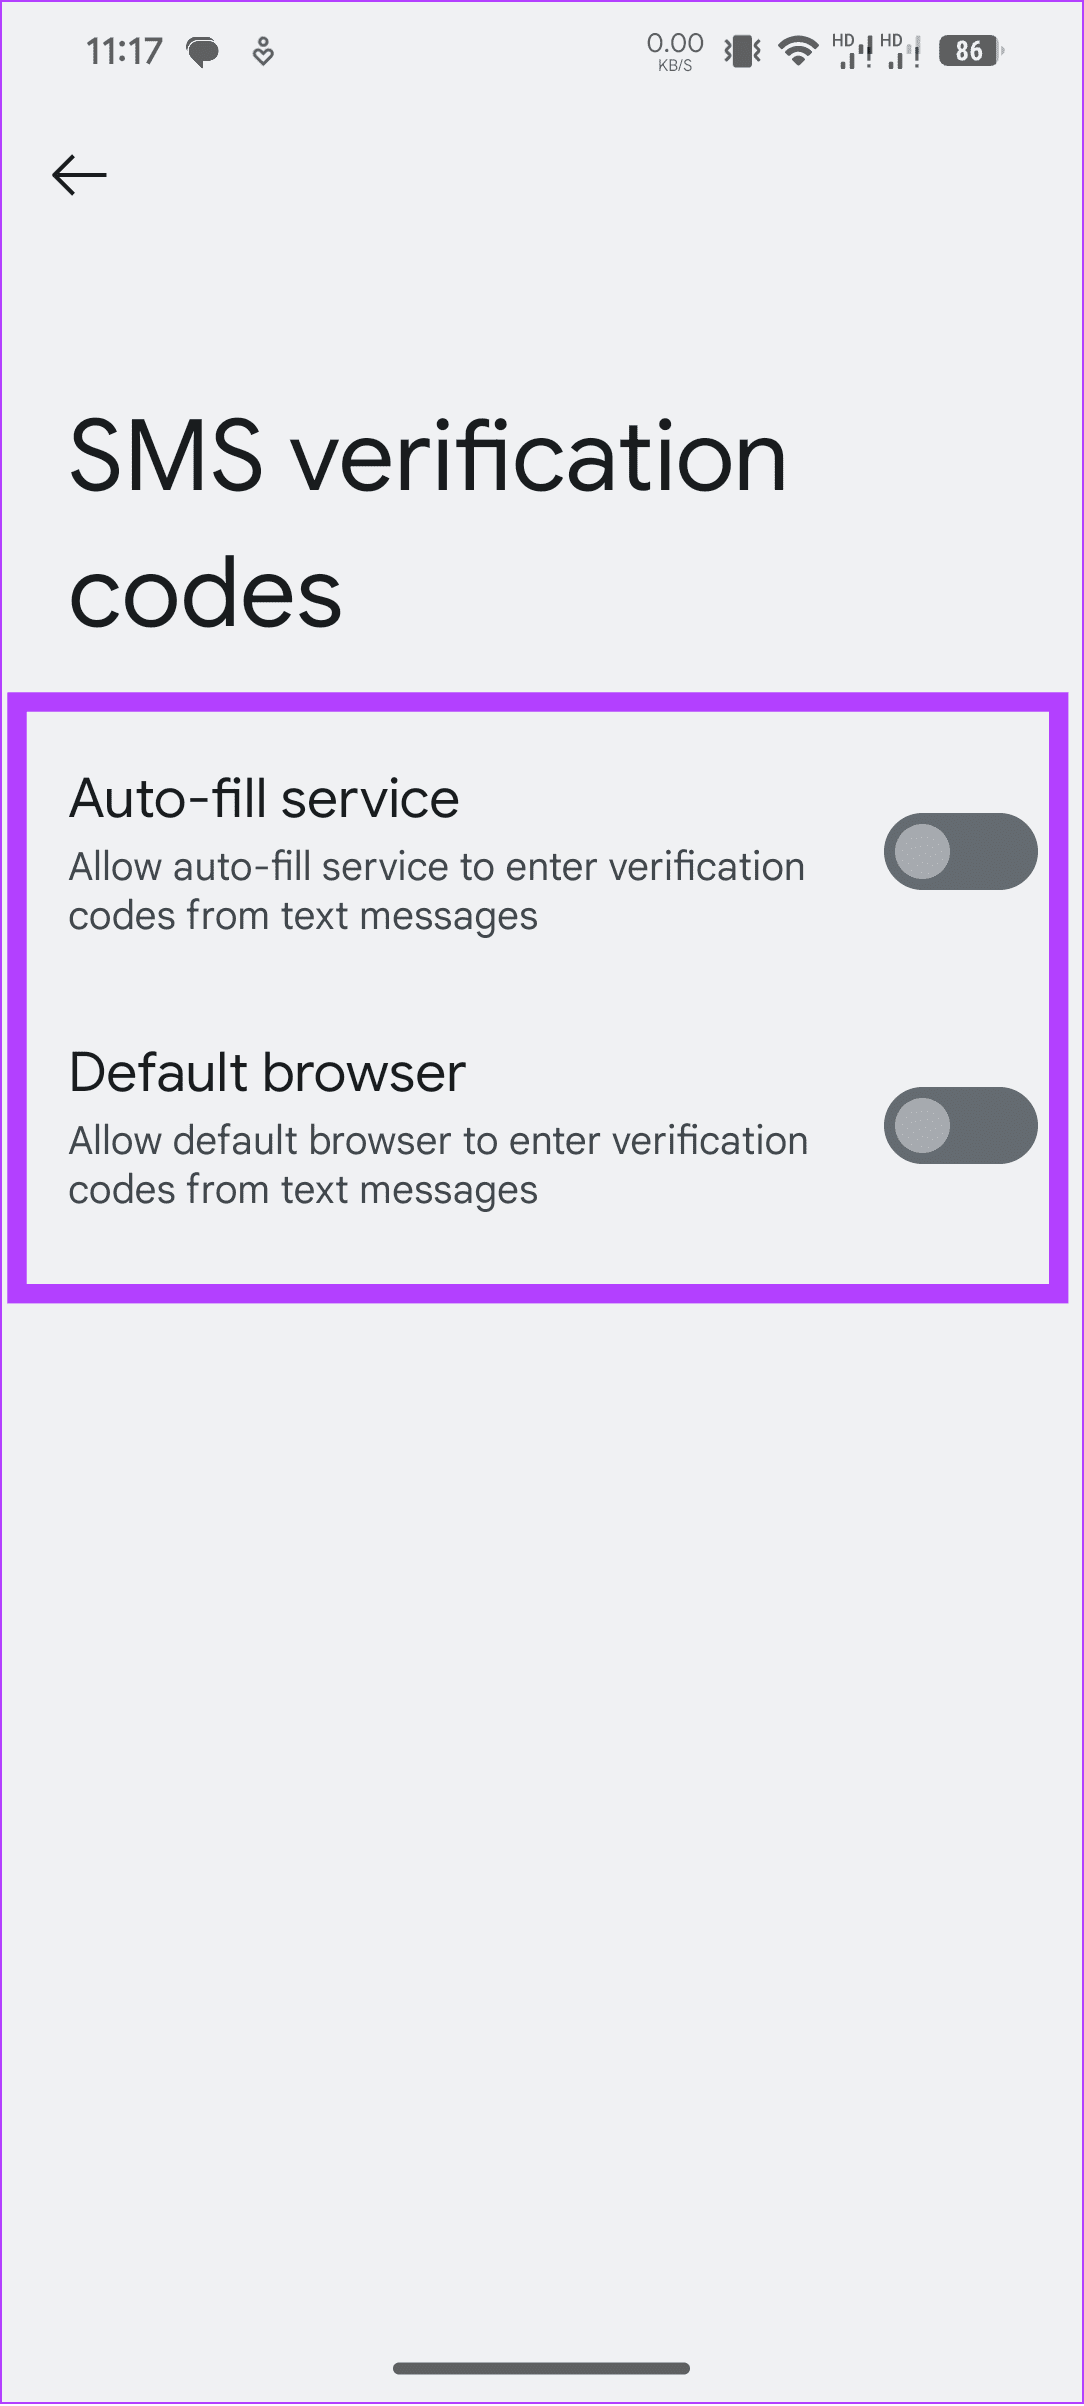 toggle off auto fill service and default browser